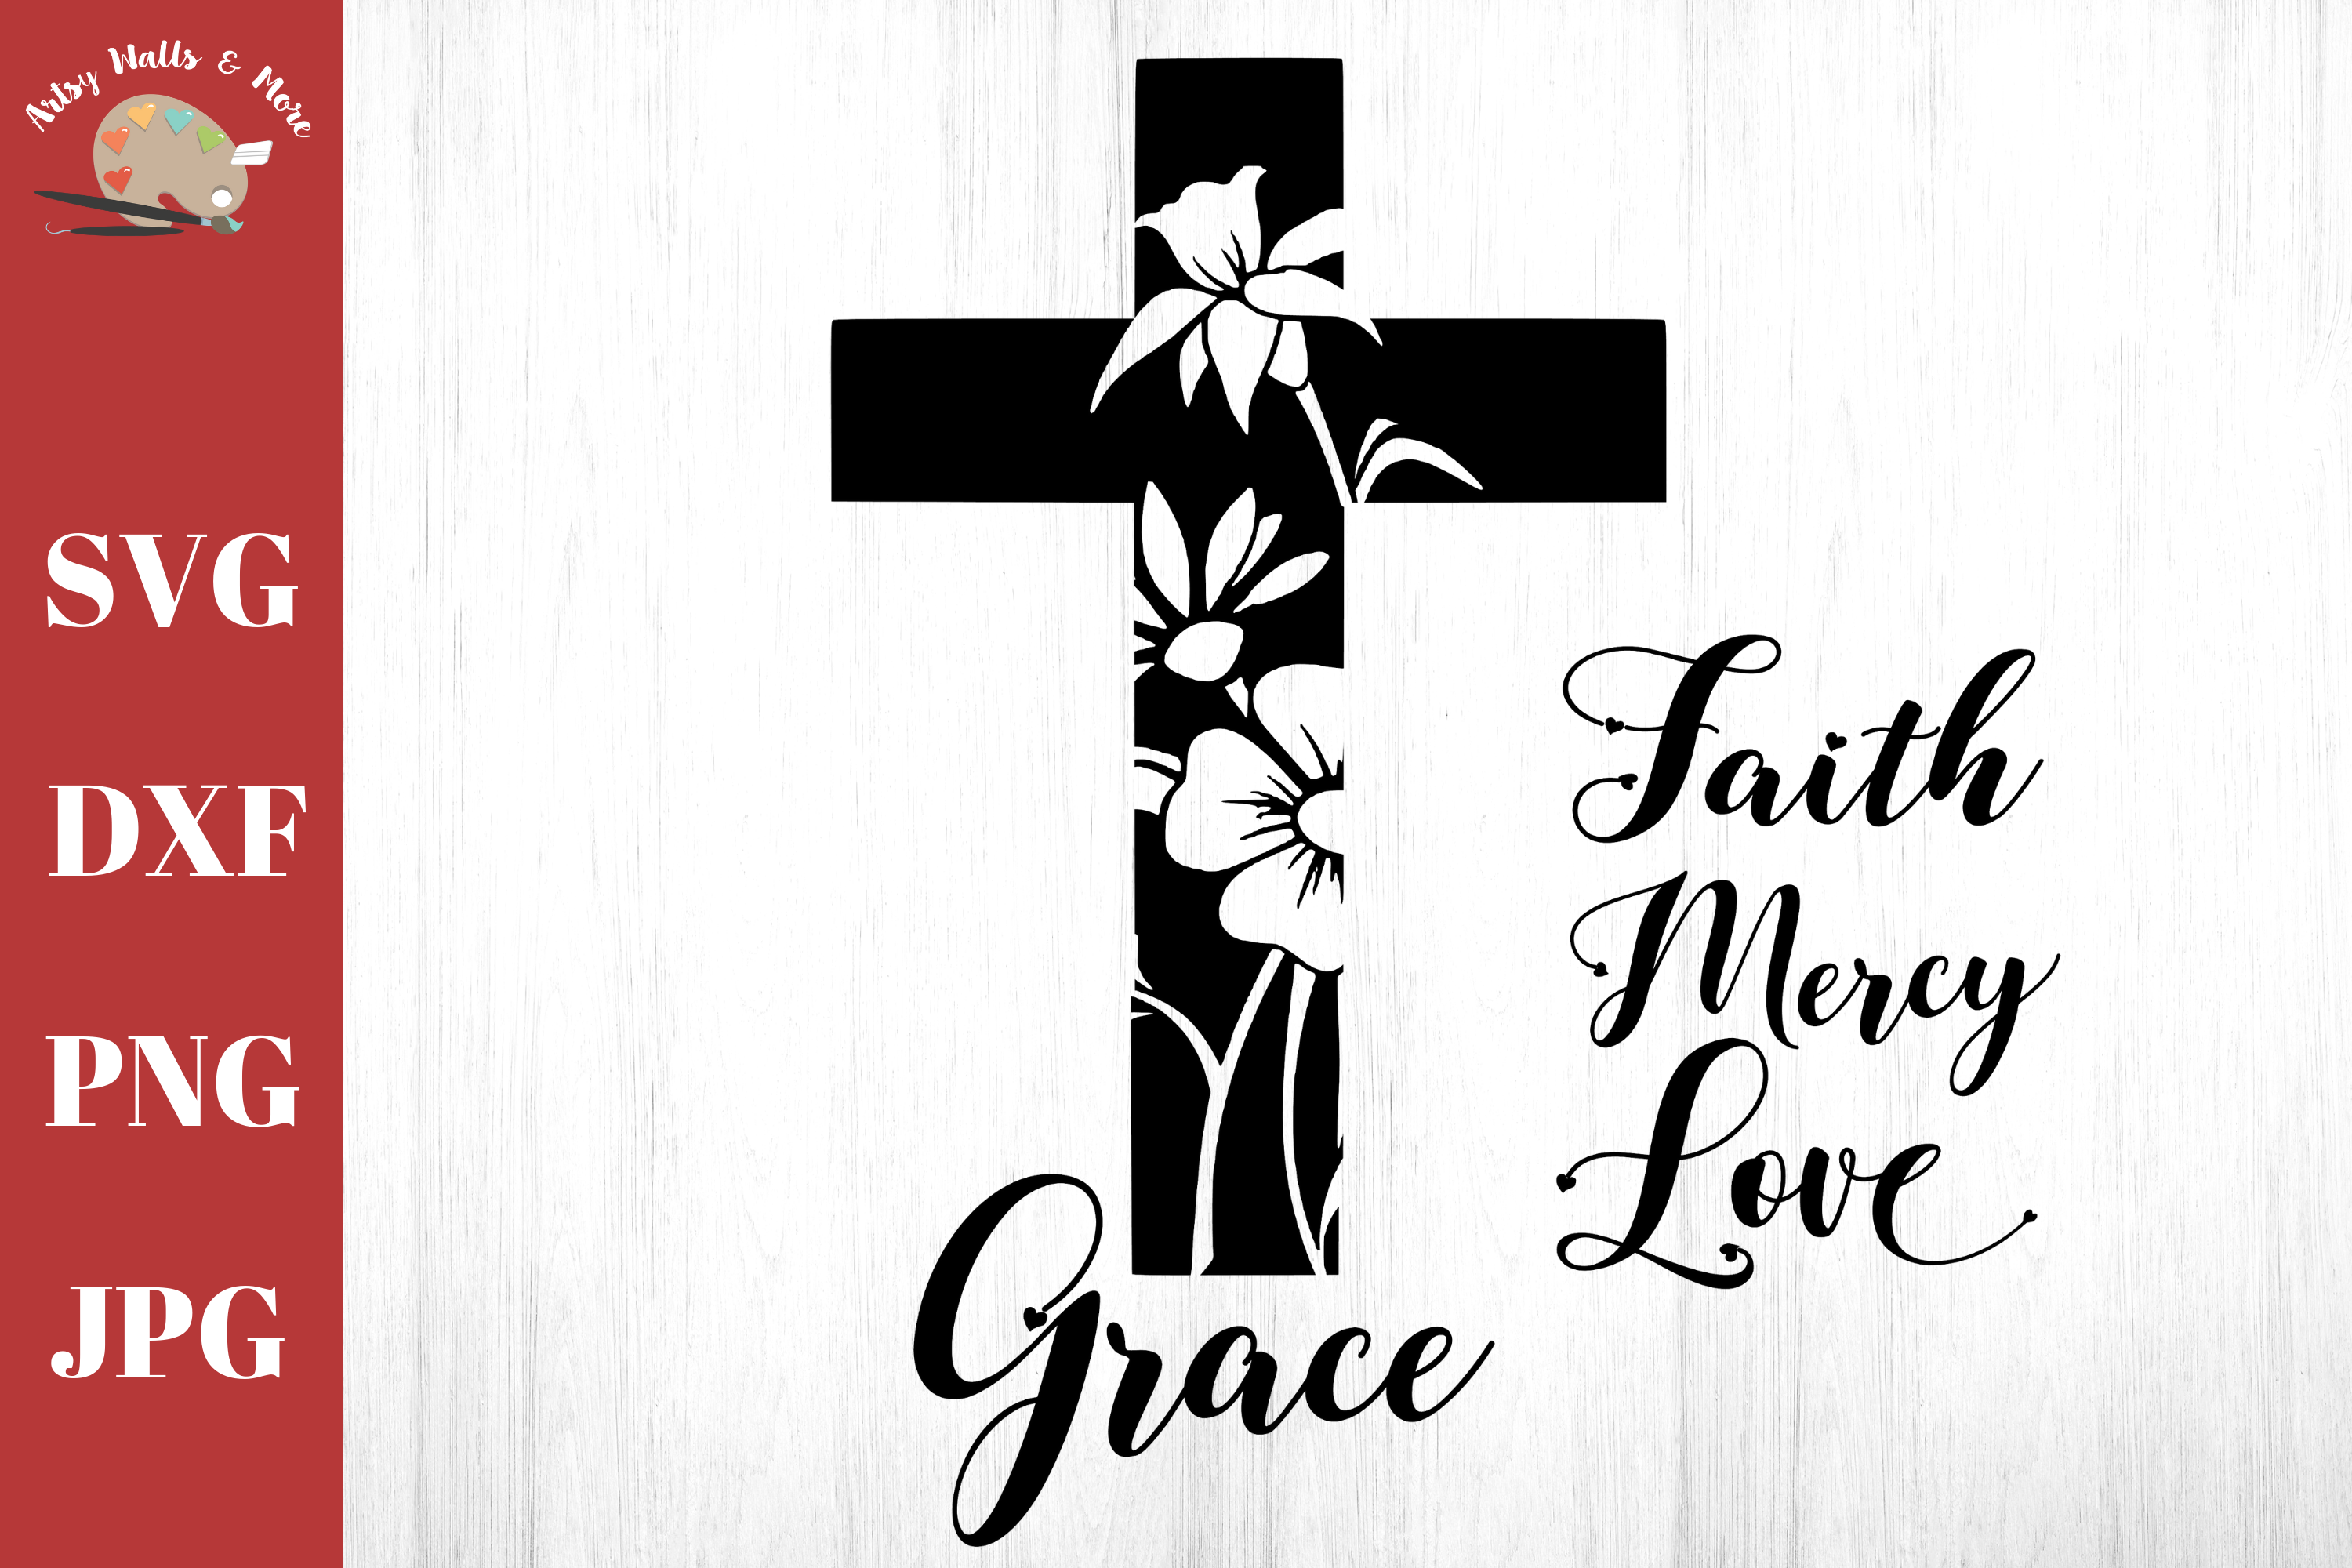 Download Free SVG Cross svg bundle - Cross with flowers - Christian faith.....